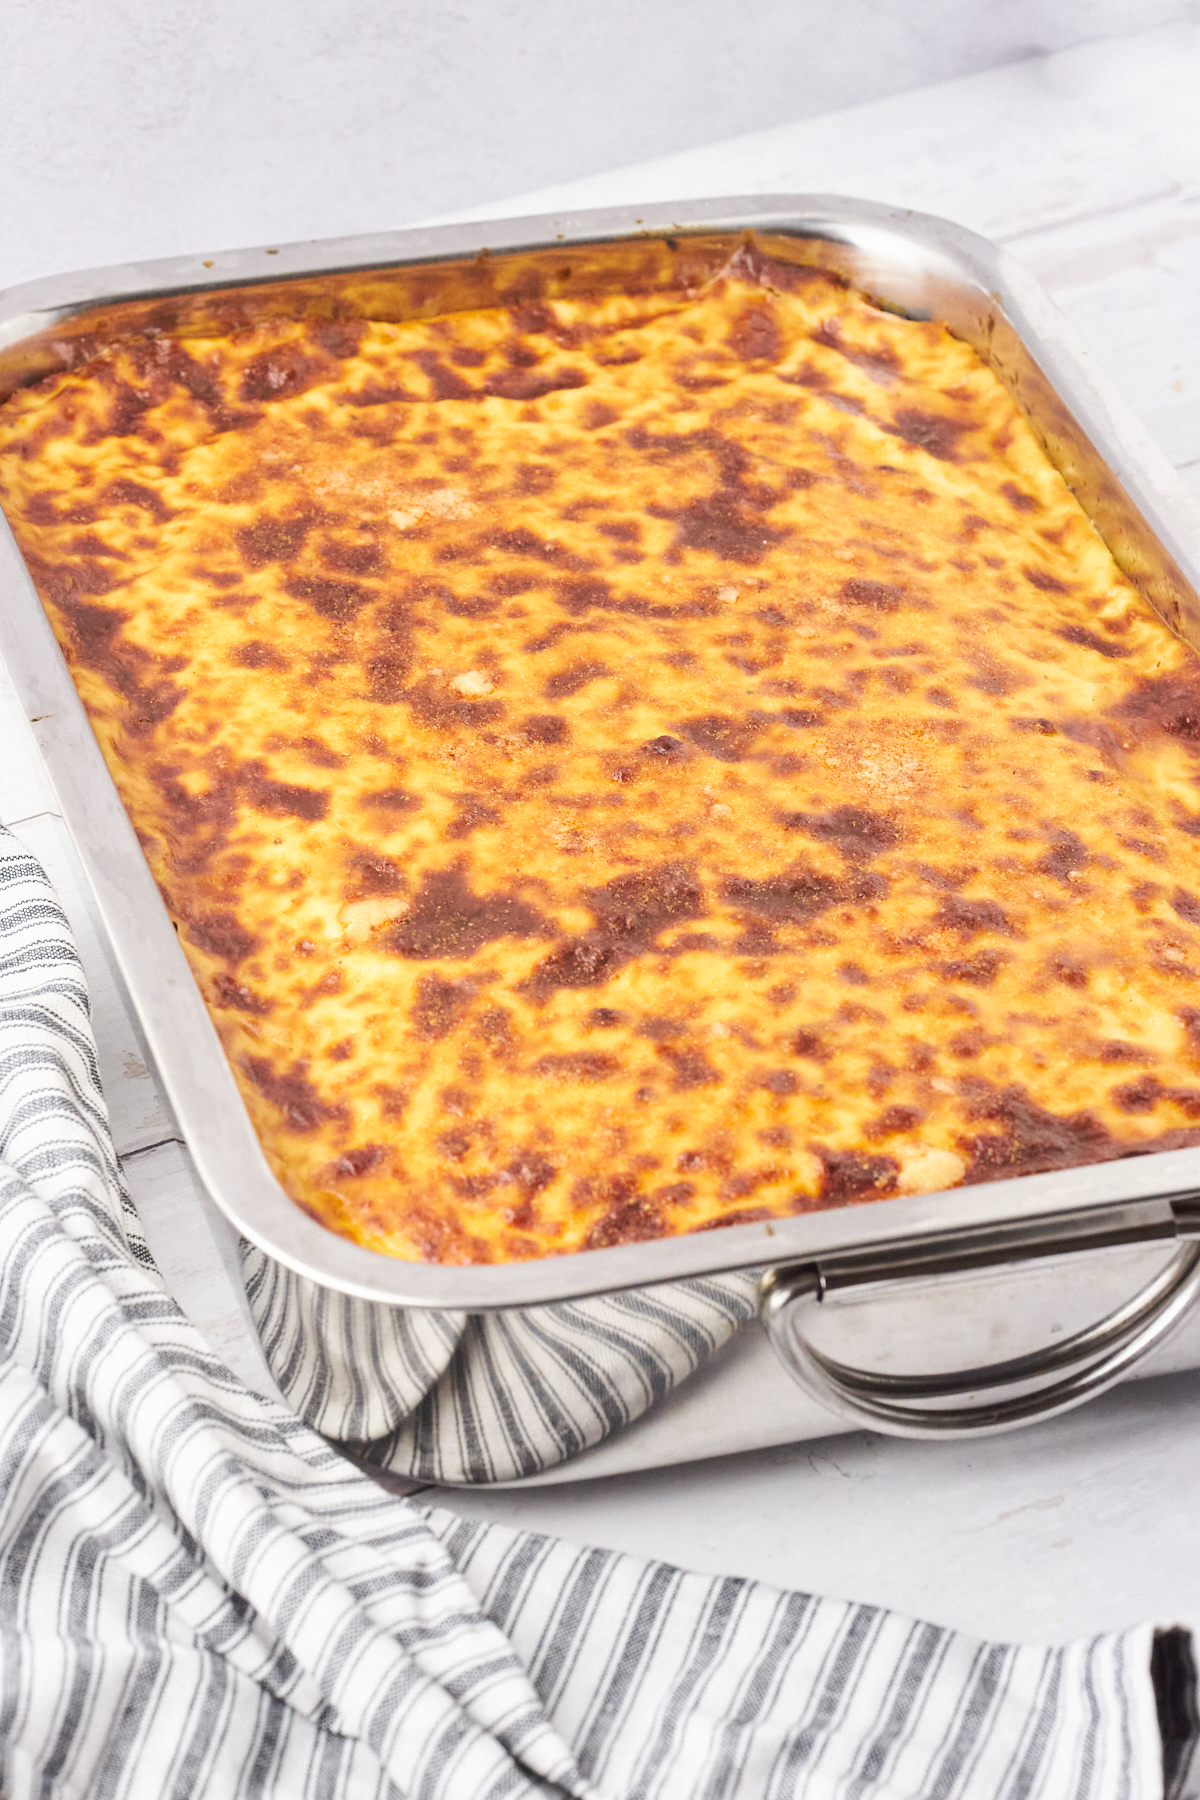 Pastitsio, which is a type of Greek lasagna, in a large baking dish